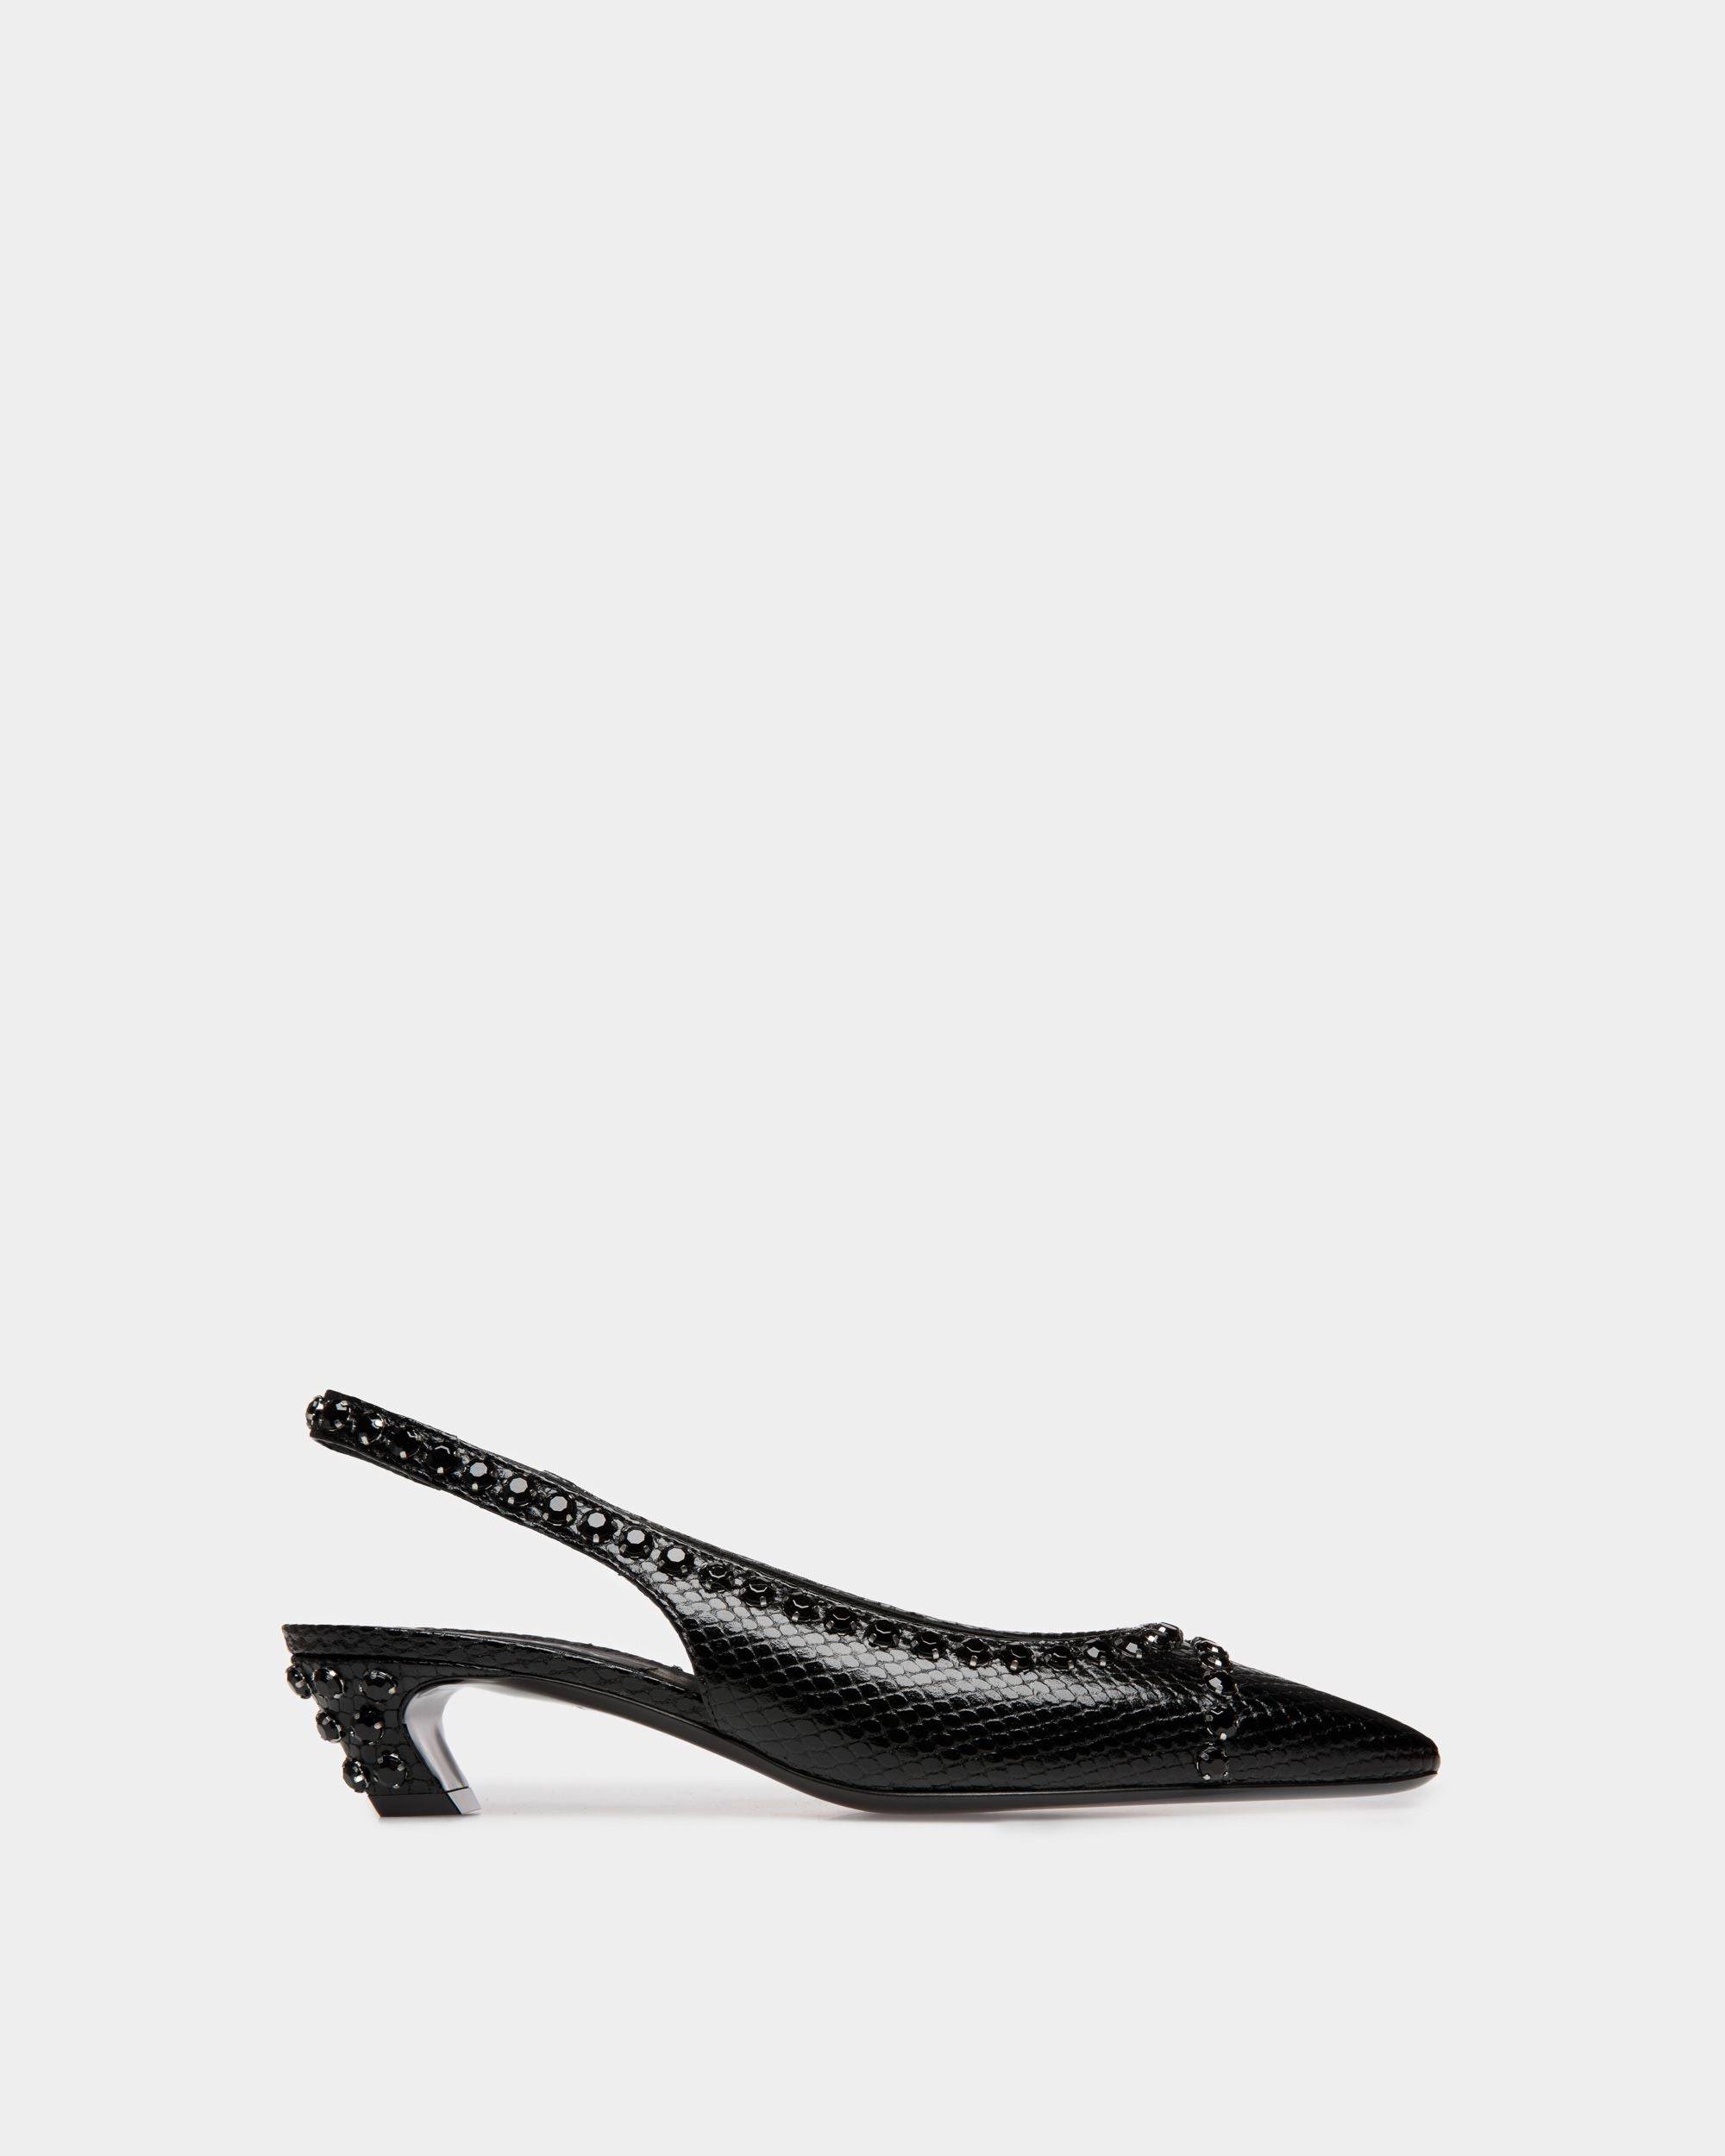 Sylt | Women's Slingback Pump in Black Python Printed Leather | Bally | Still Life Side